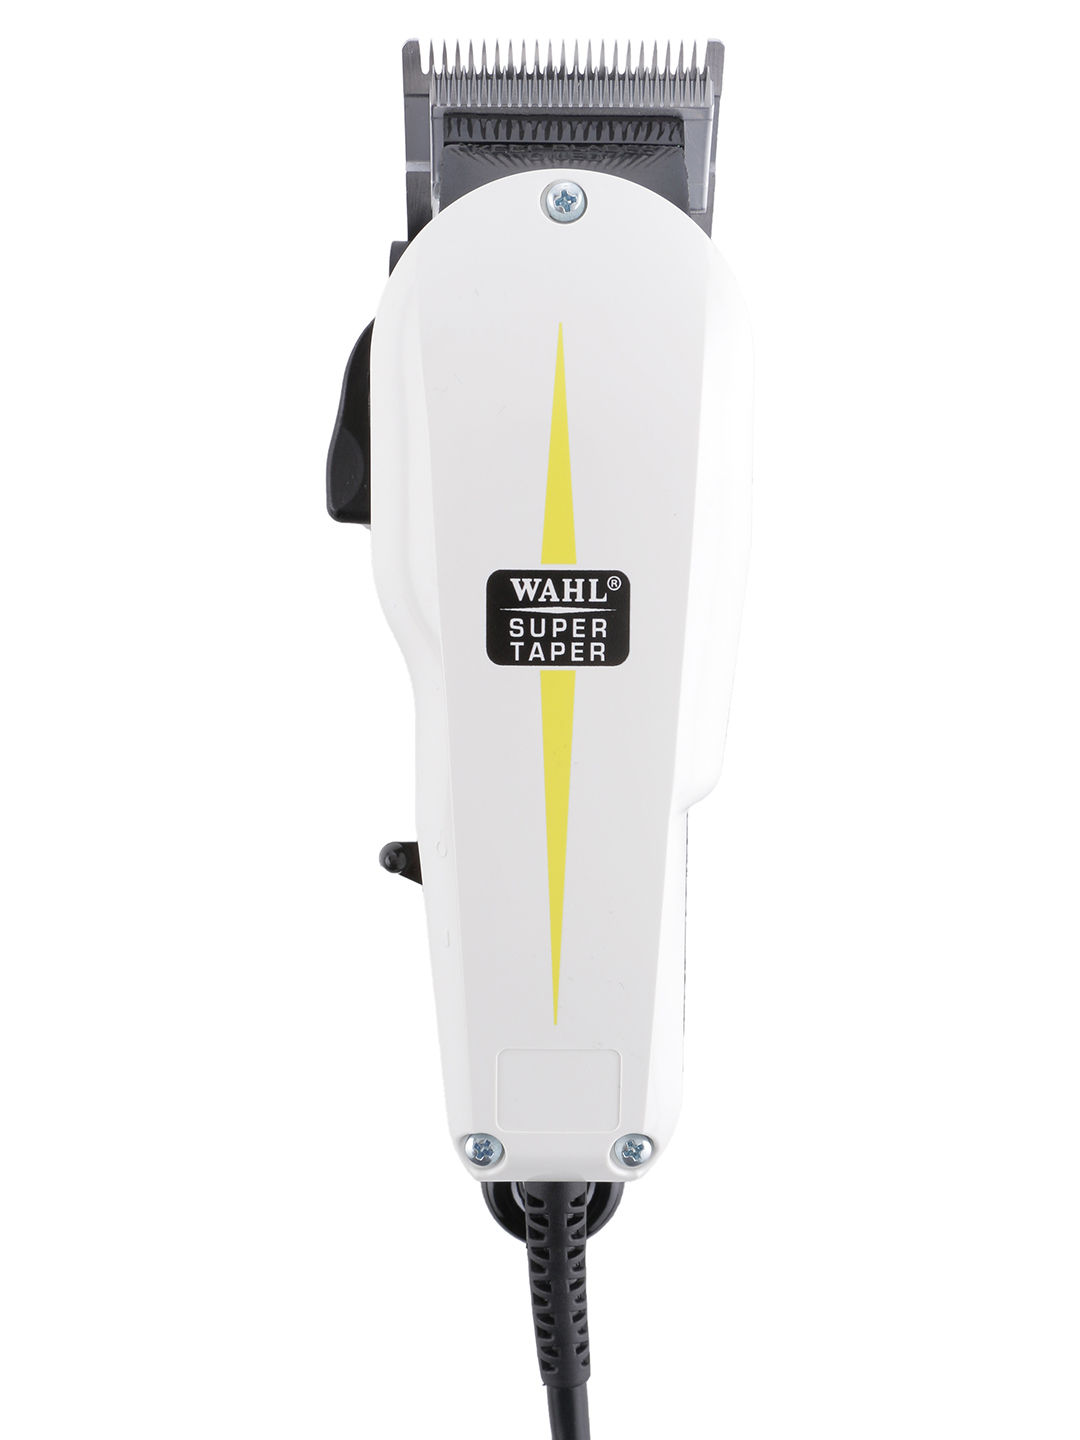 Wahl Super Taper New Corded Clipper Trimmer - White: Buy Wahl Super Taper  New Corded Clipper Trimmer - White Online at Best Price in India | Nykaa